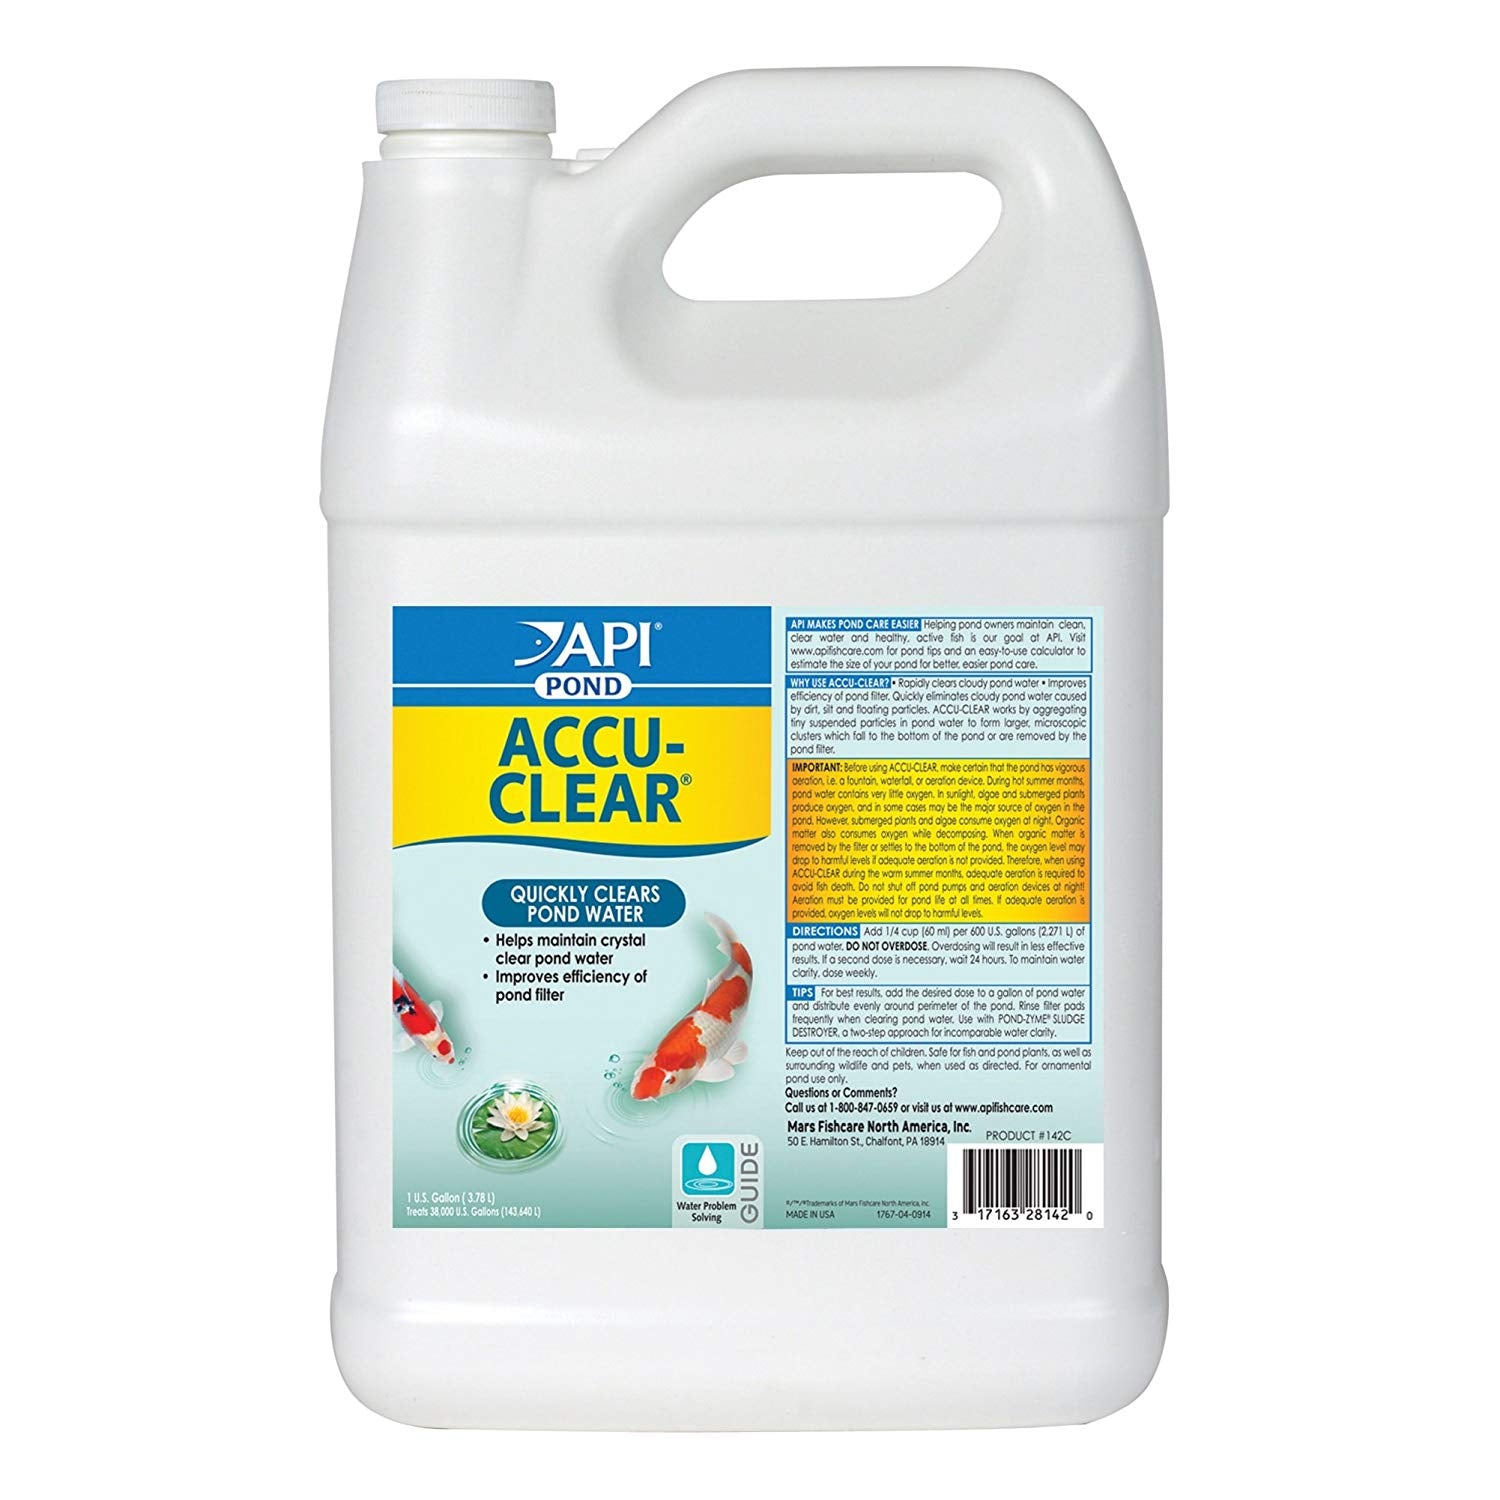 API Pond Accu-Clear Quickly Clears Pond Water